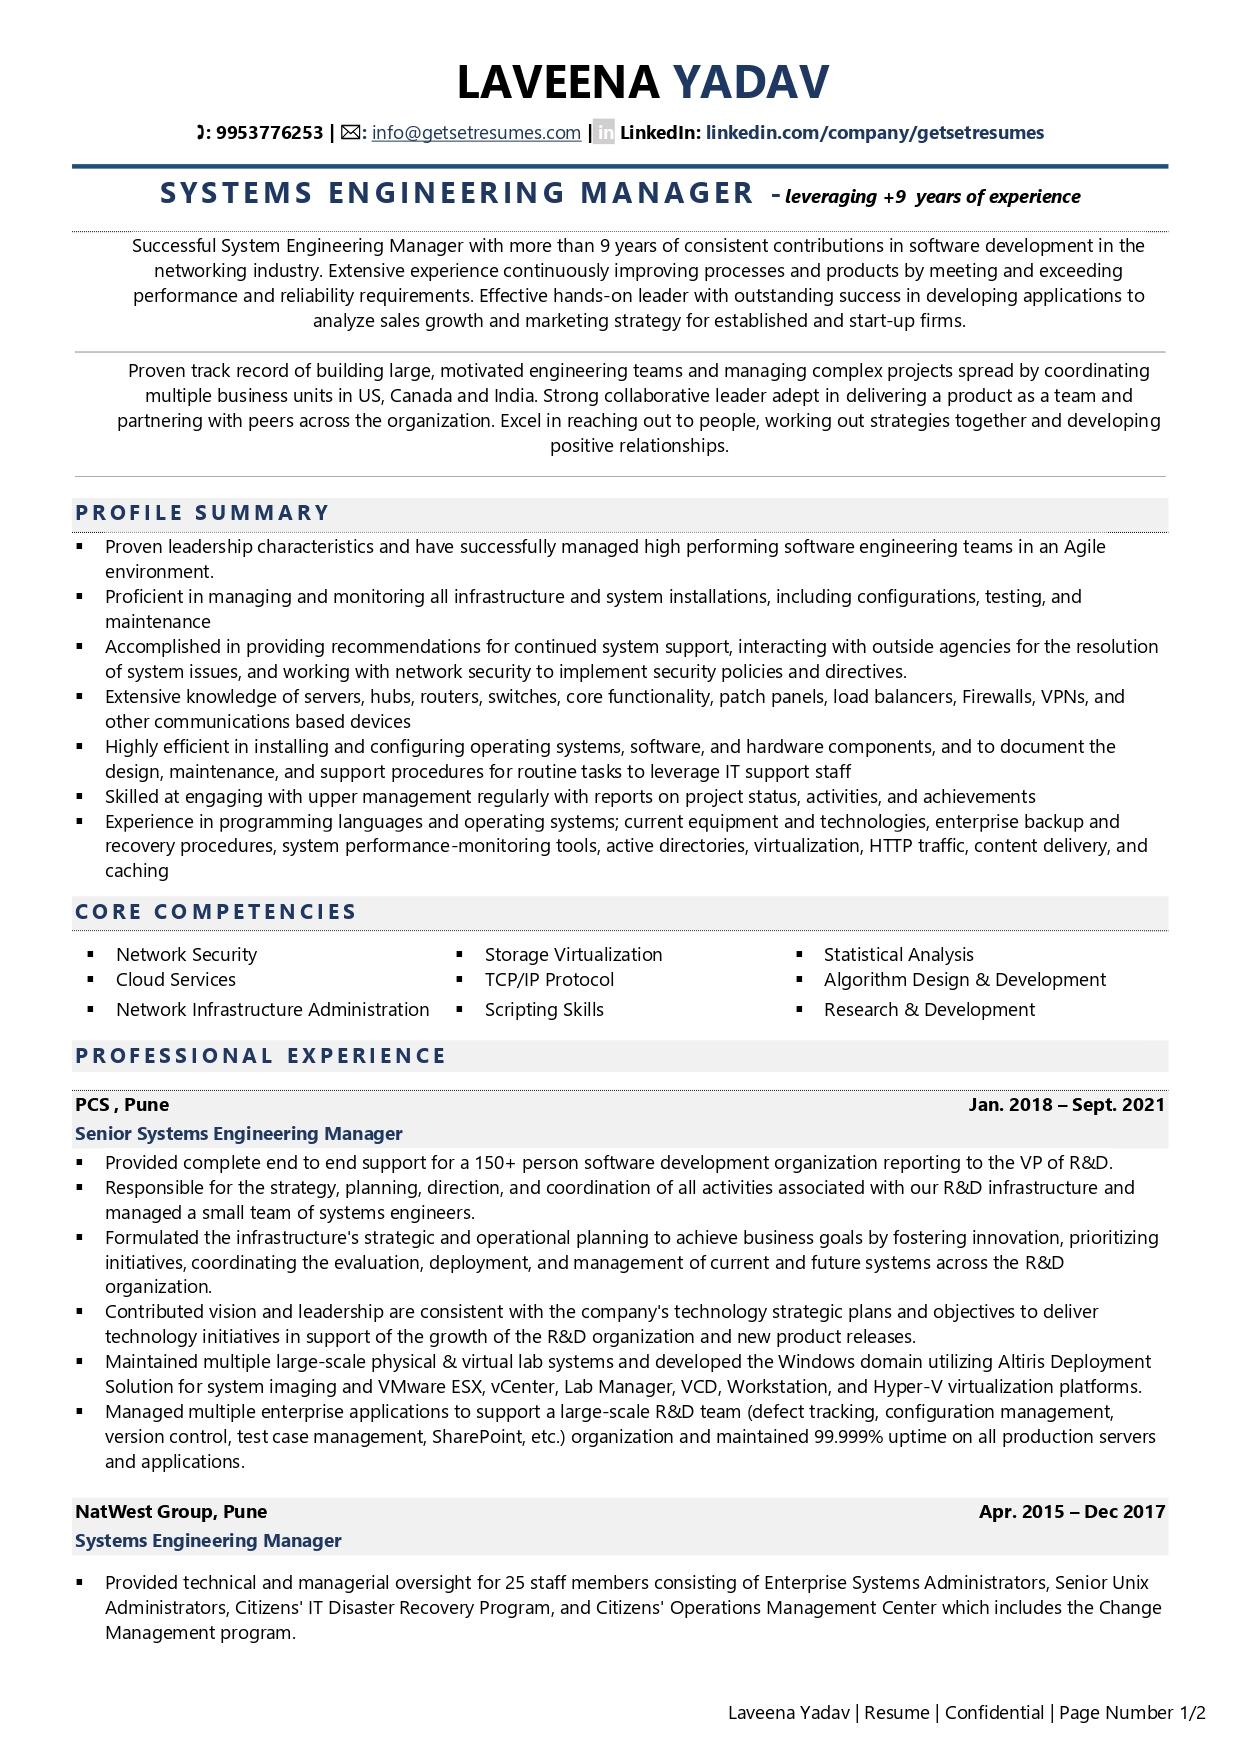 Systems Engineering Manager - Resume Example & Template